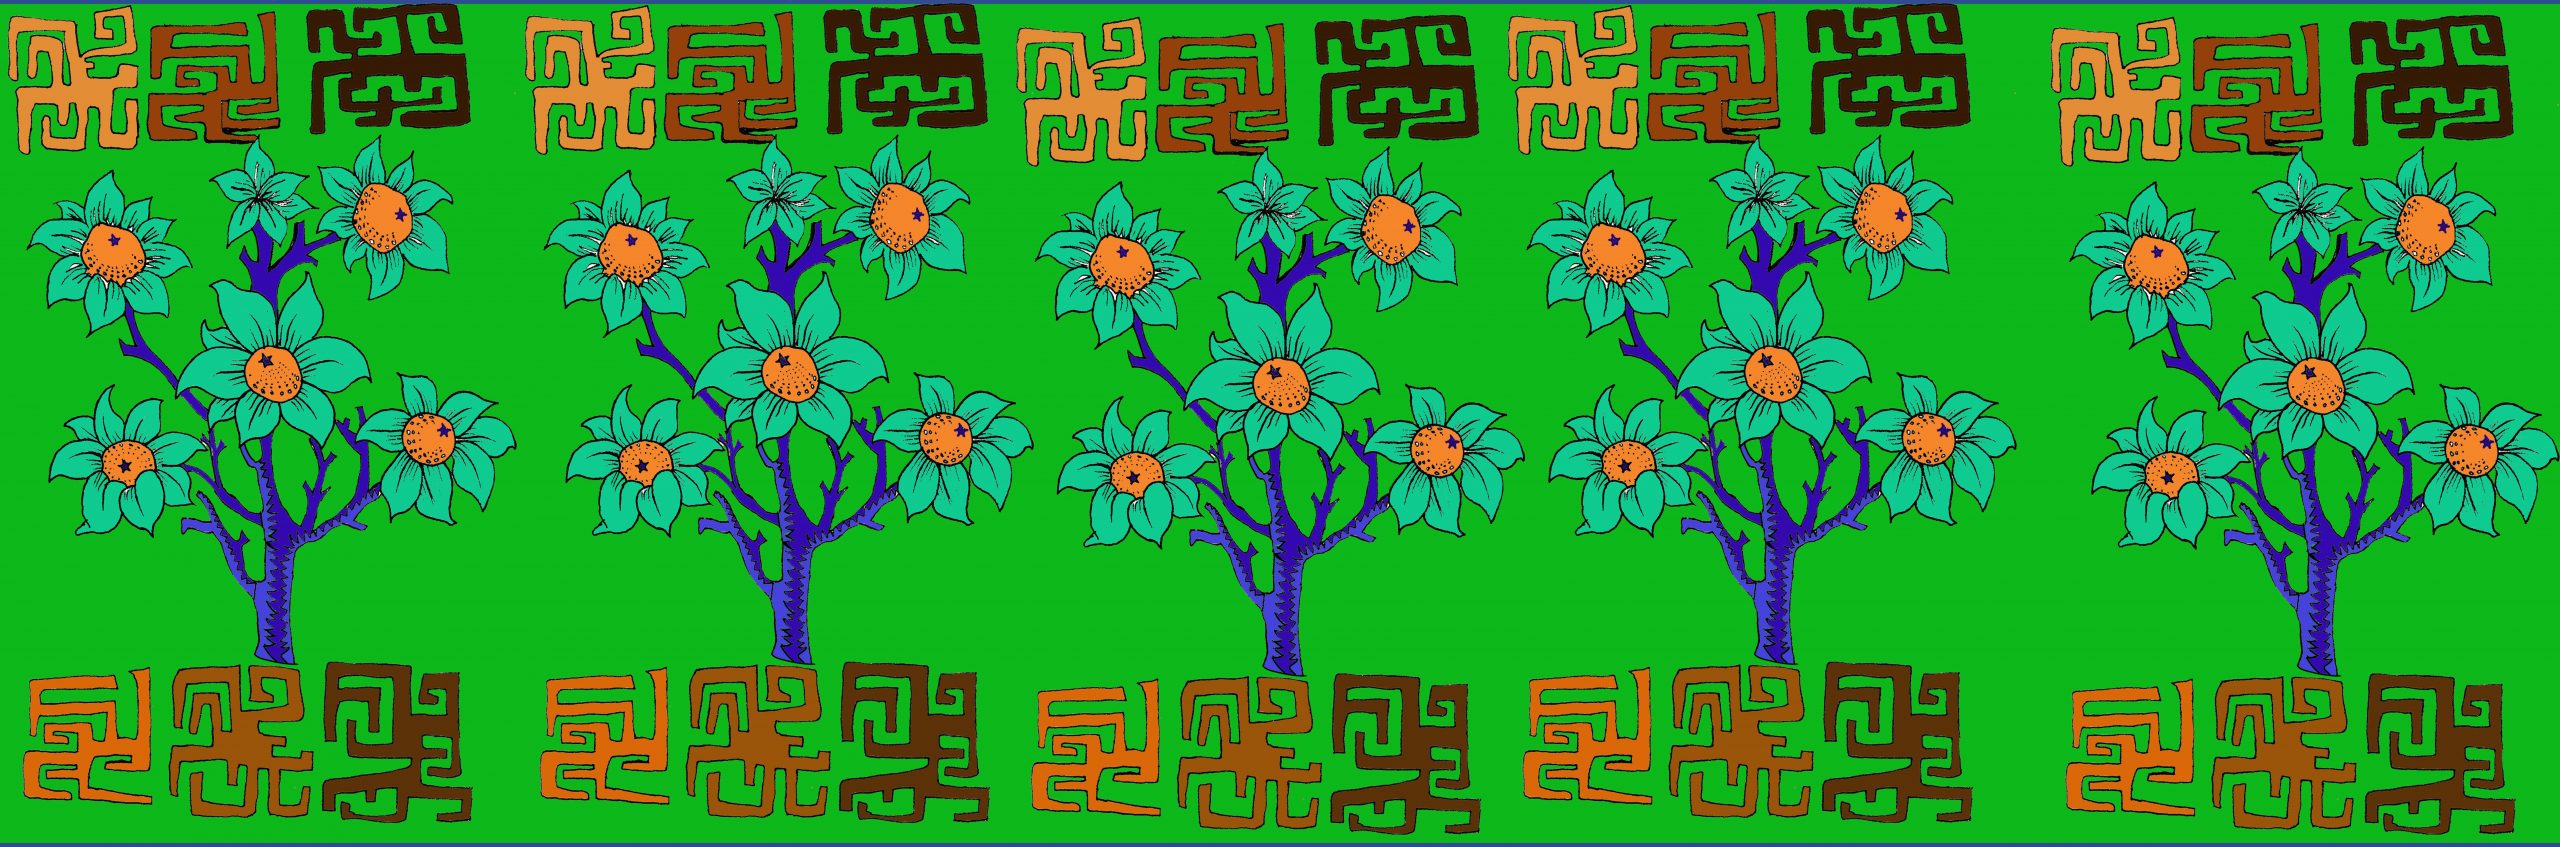 Green flowers on blue tree branches and brown maze-like pattern against green background